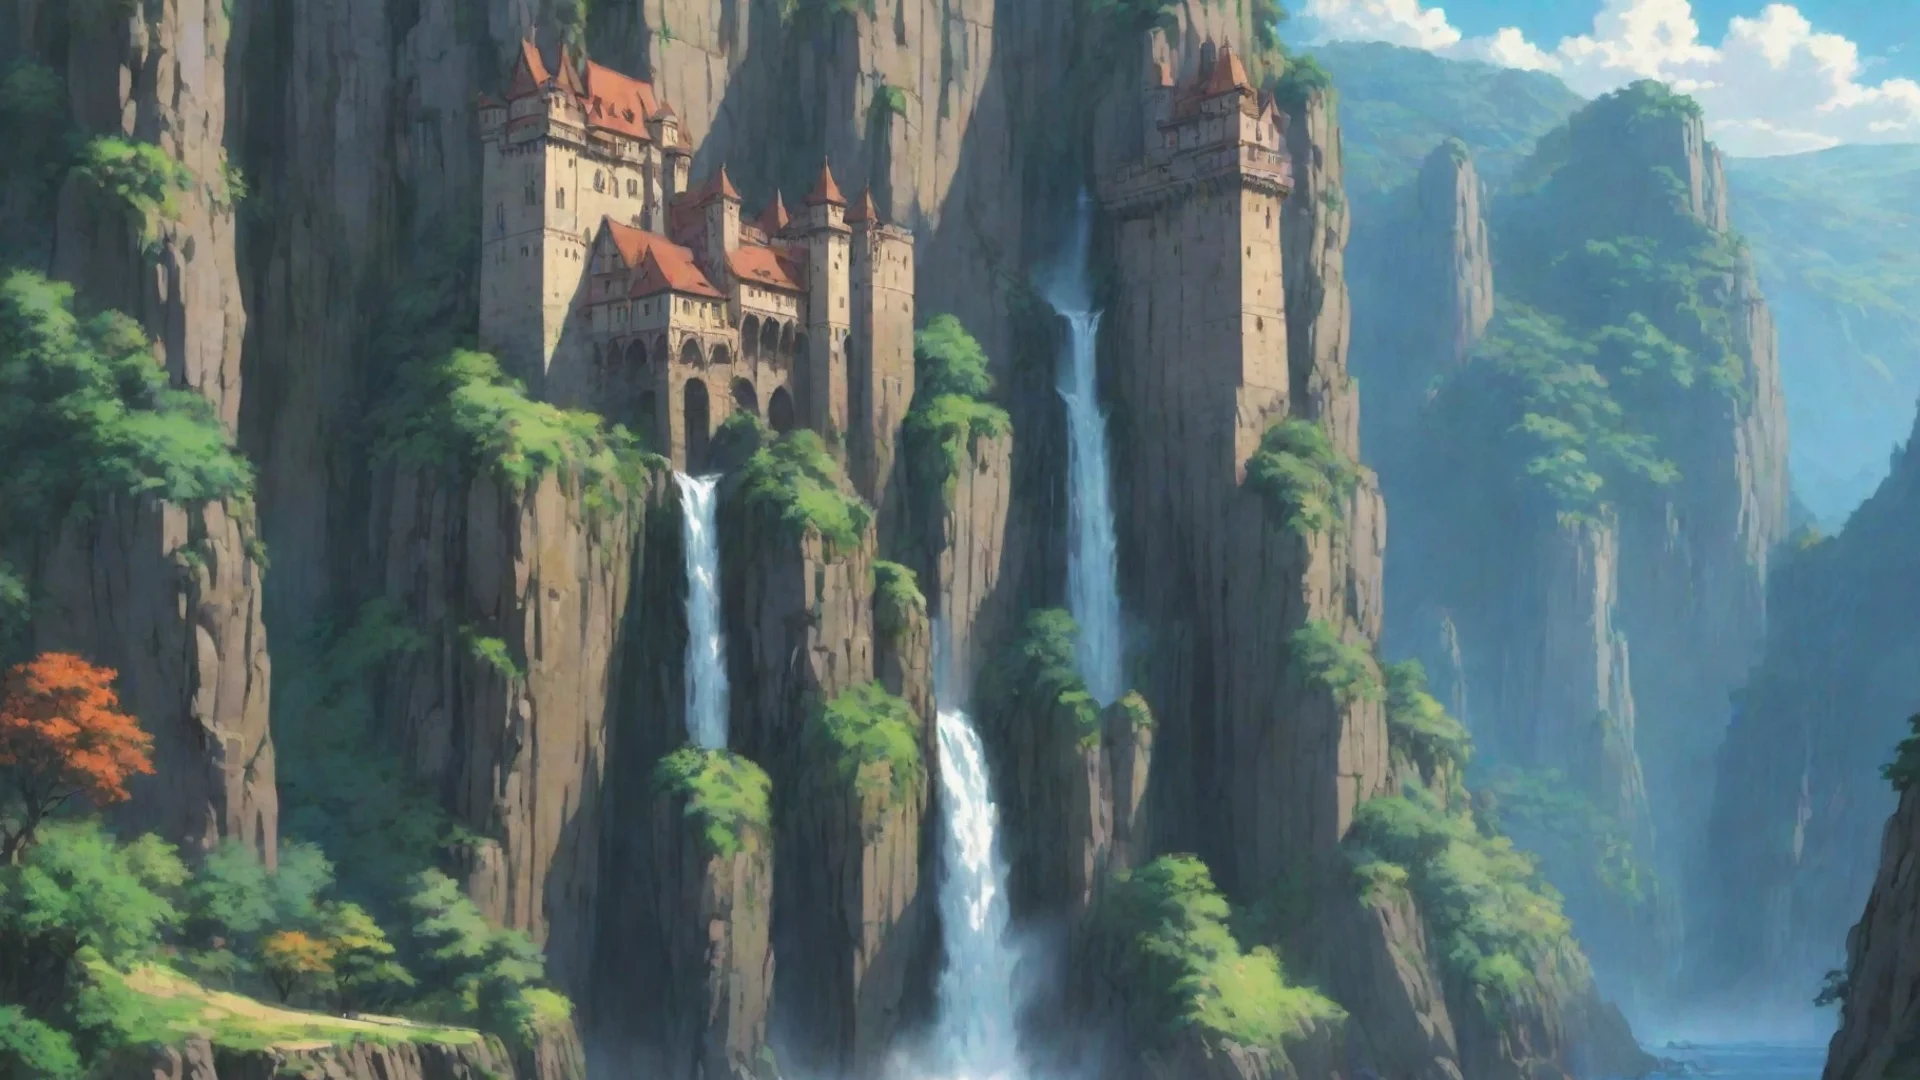 aiamazing amazing ghibli artistic castle cliff waterfall hd anime aesthetic beauty awesome portrait 2 wide